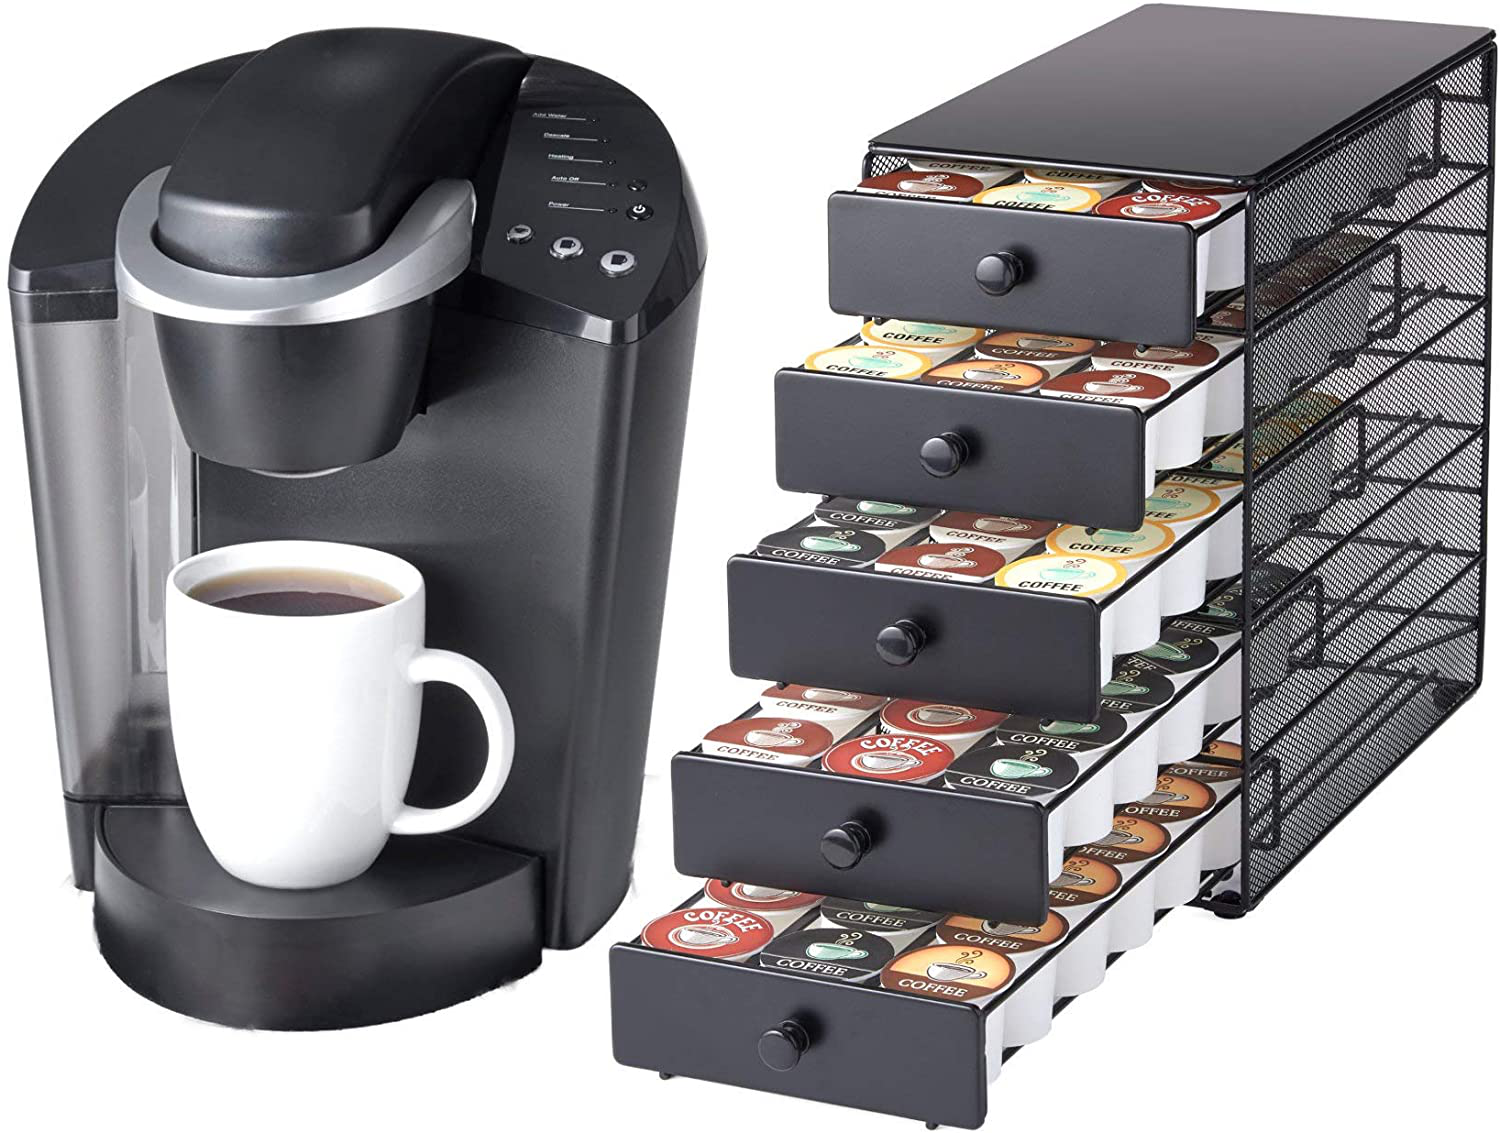 Coffee Pod Popular brand in the world Storage Drawer Black famous K-Cups Satin Compatible Finish 9